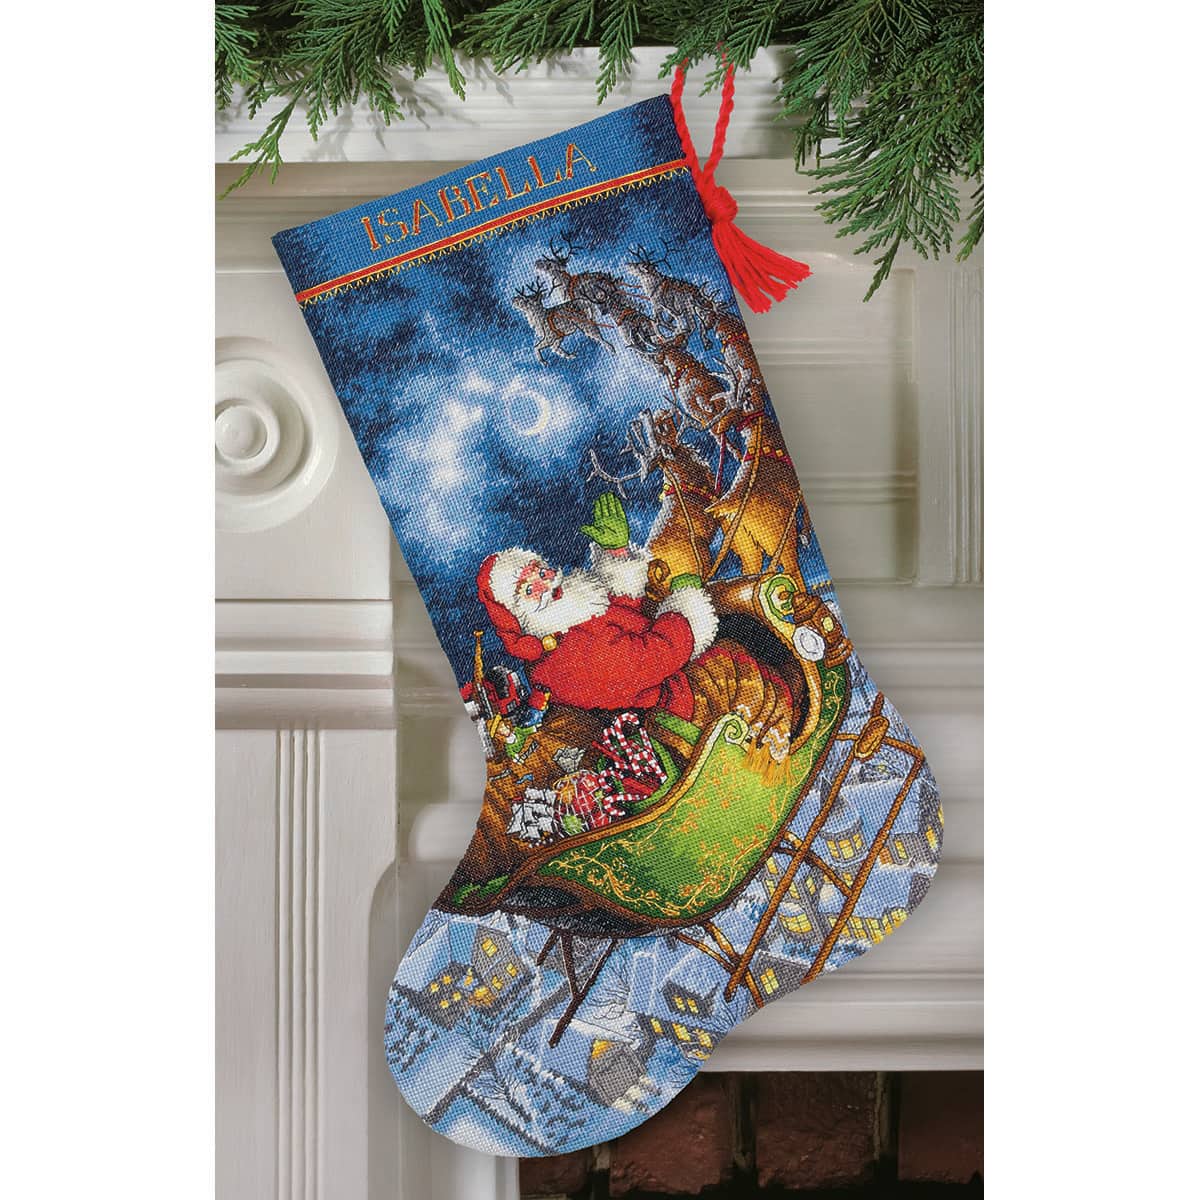 Dimensions Counted Cross Stitch Santas Sidecar Personalized Christmas Stocking Kit 16 14 Count Light Blue Aida